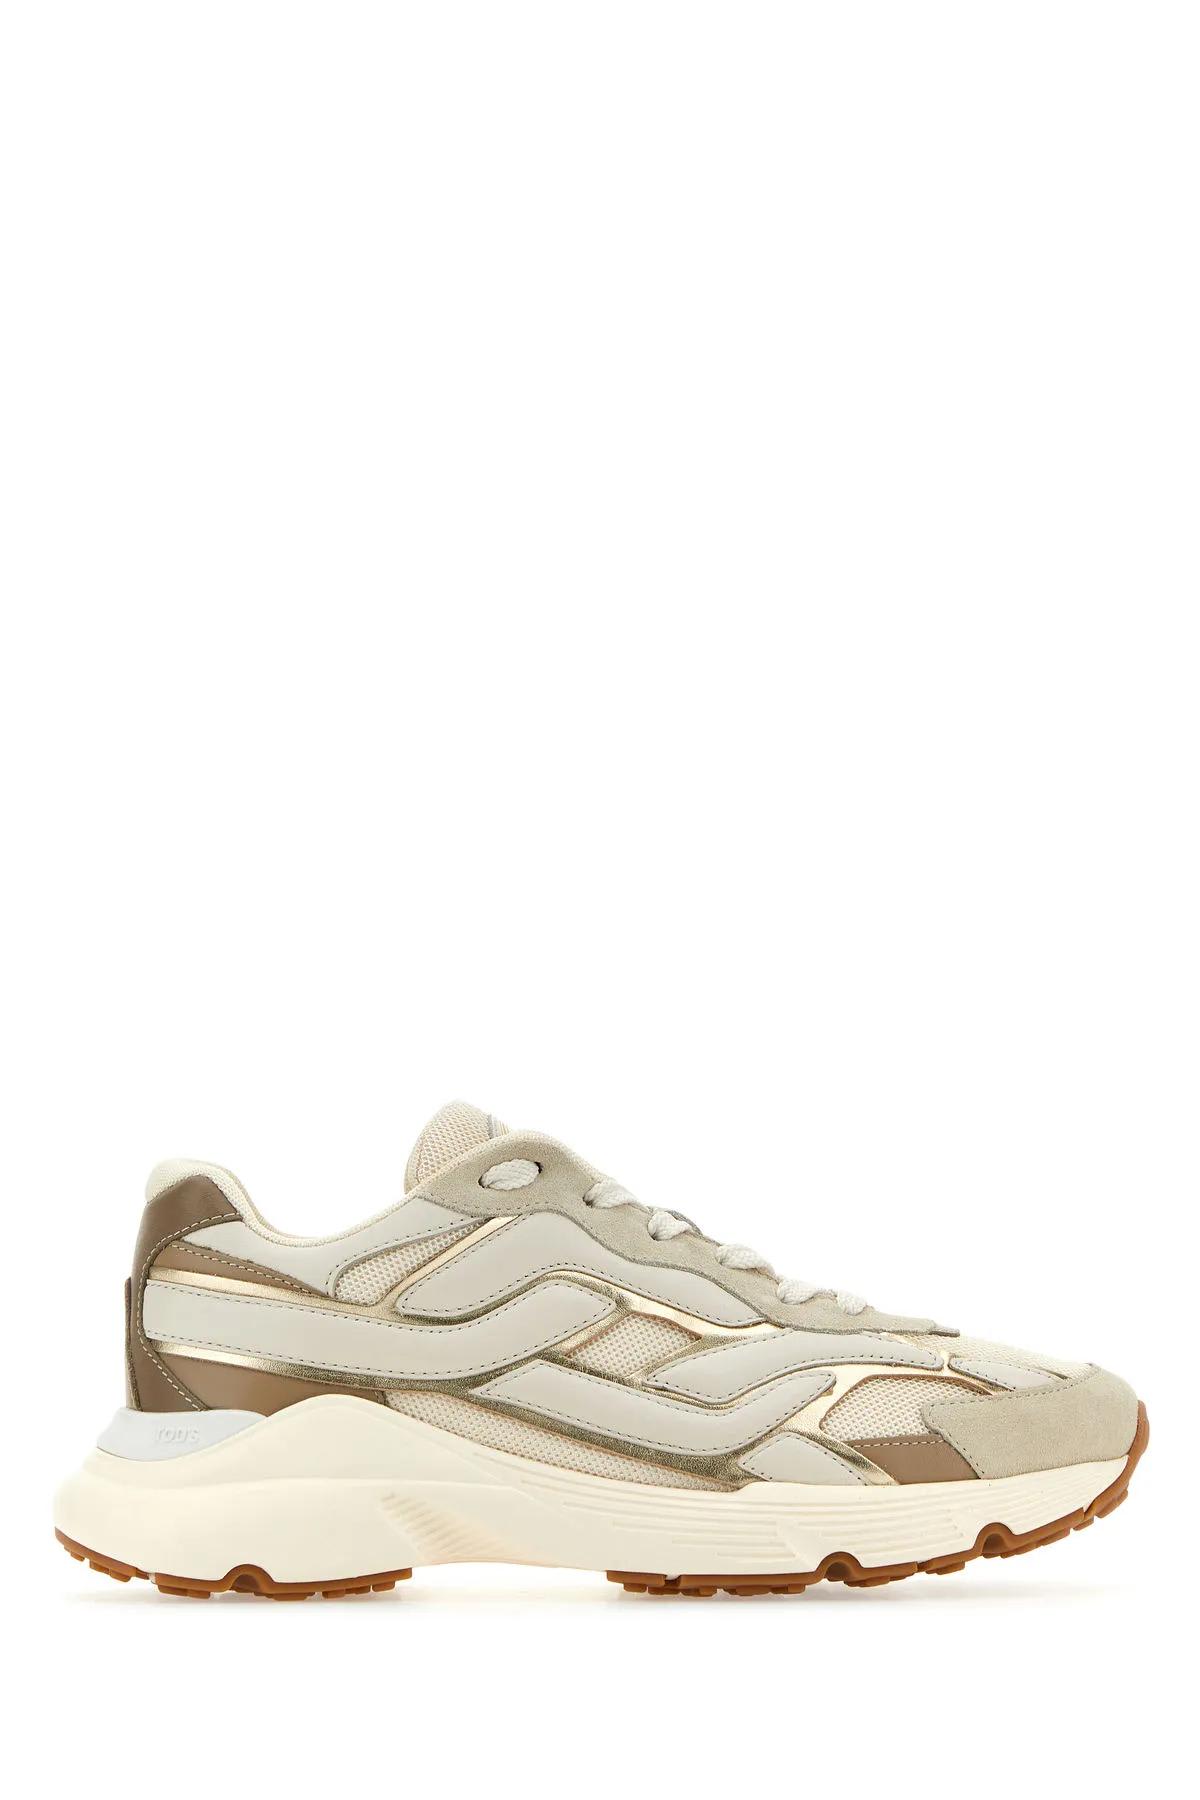 Shop Tod's Ivory Leather And Mesh Sneakers Tods In White